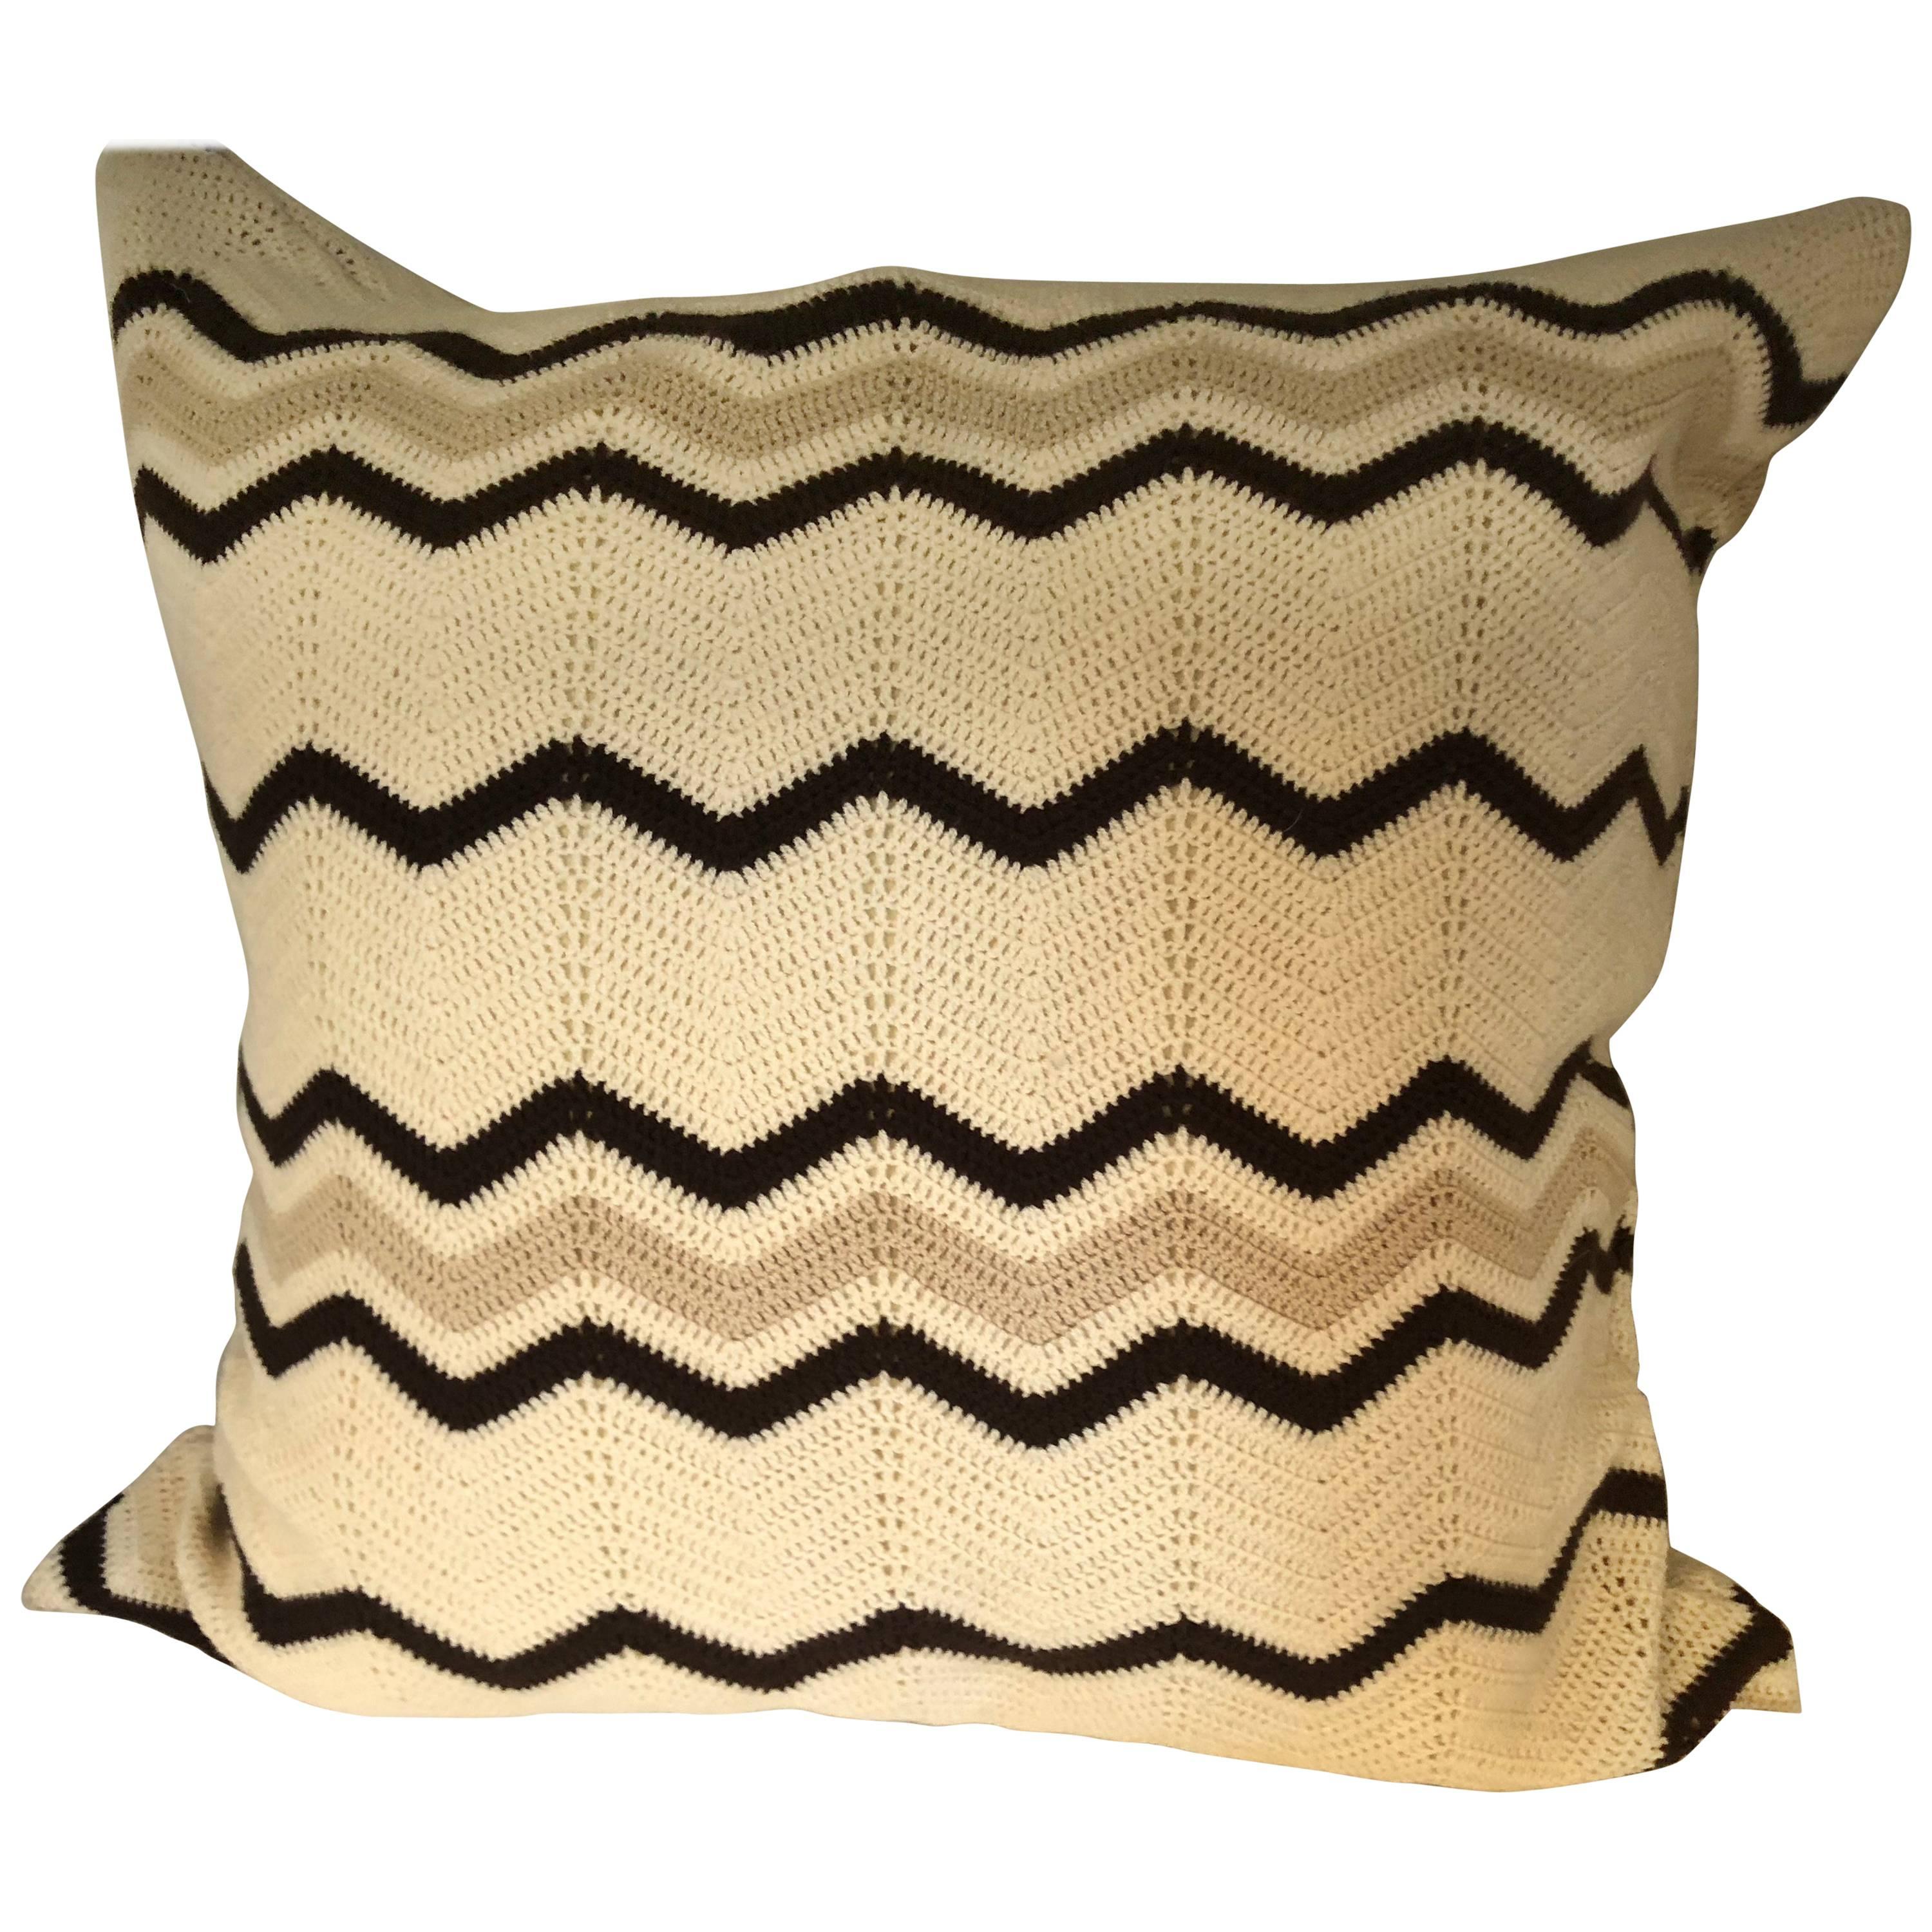  "Anzio"  Wool Pillow by Le Lampade